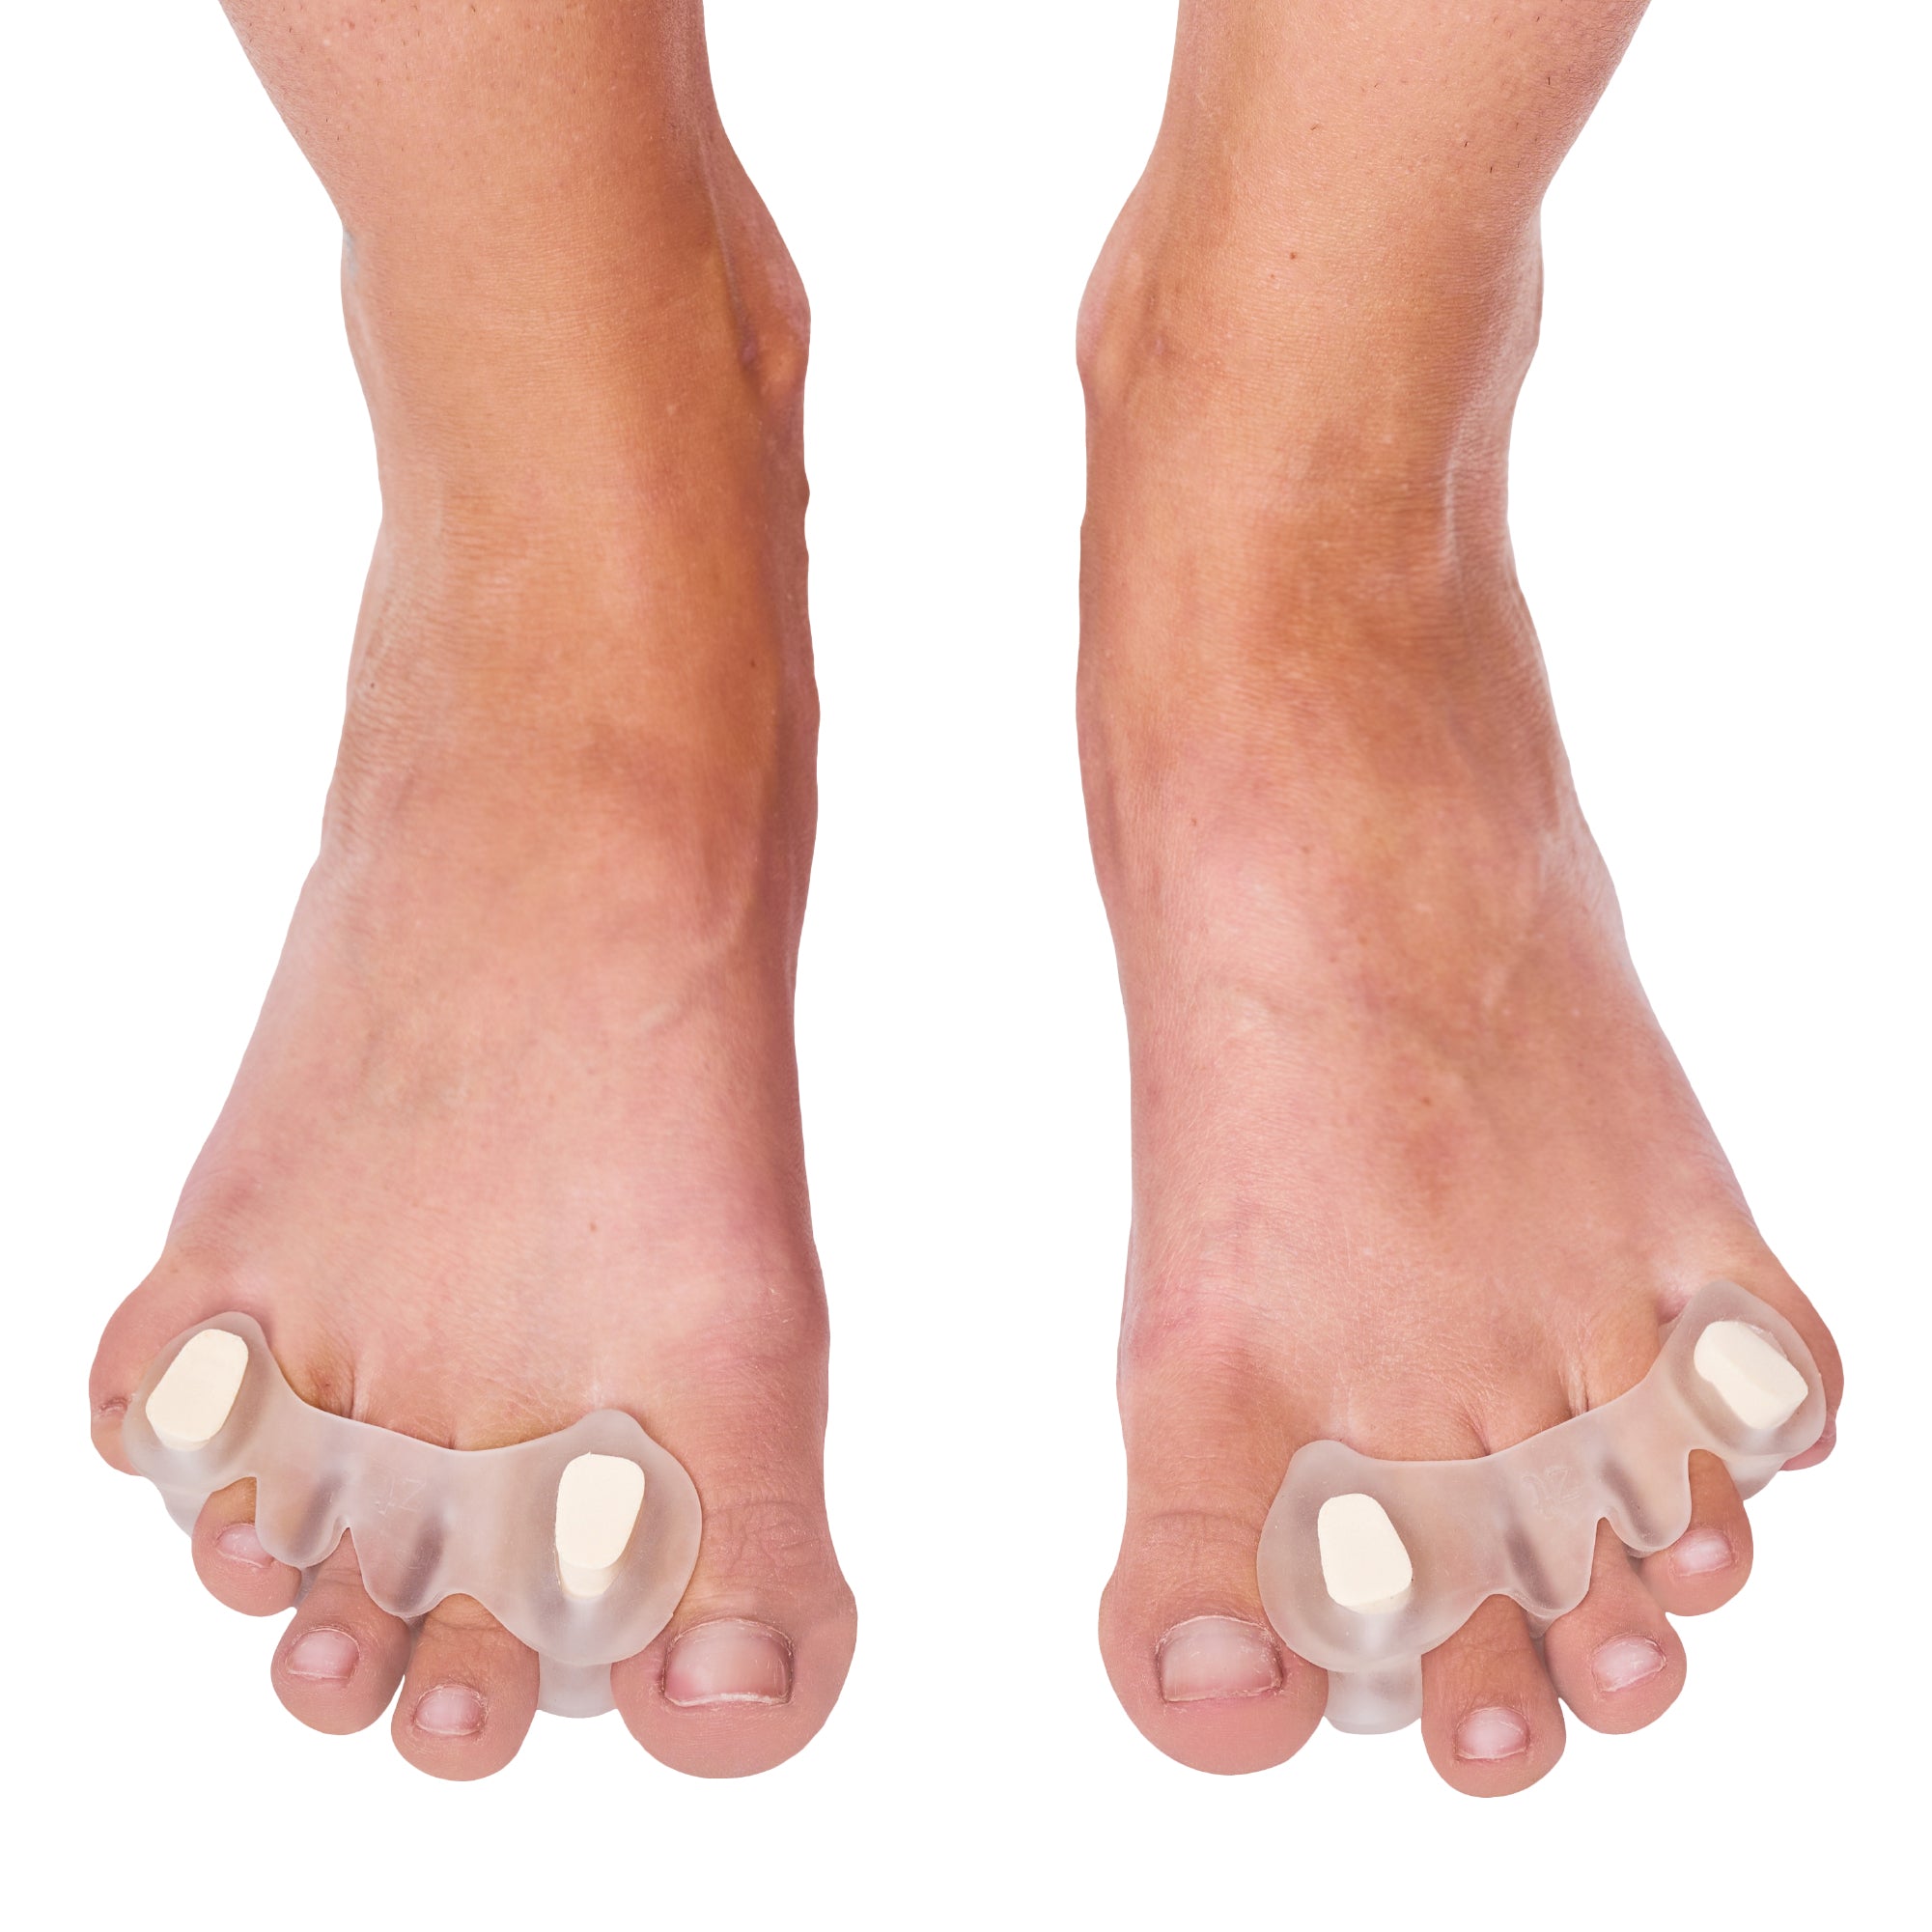 NEW! Customizable Toe Separators with Inserts - ZenToes